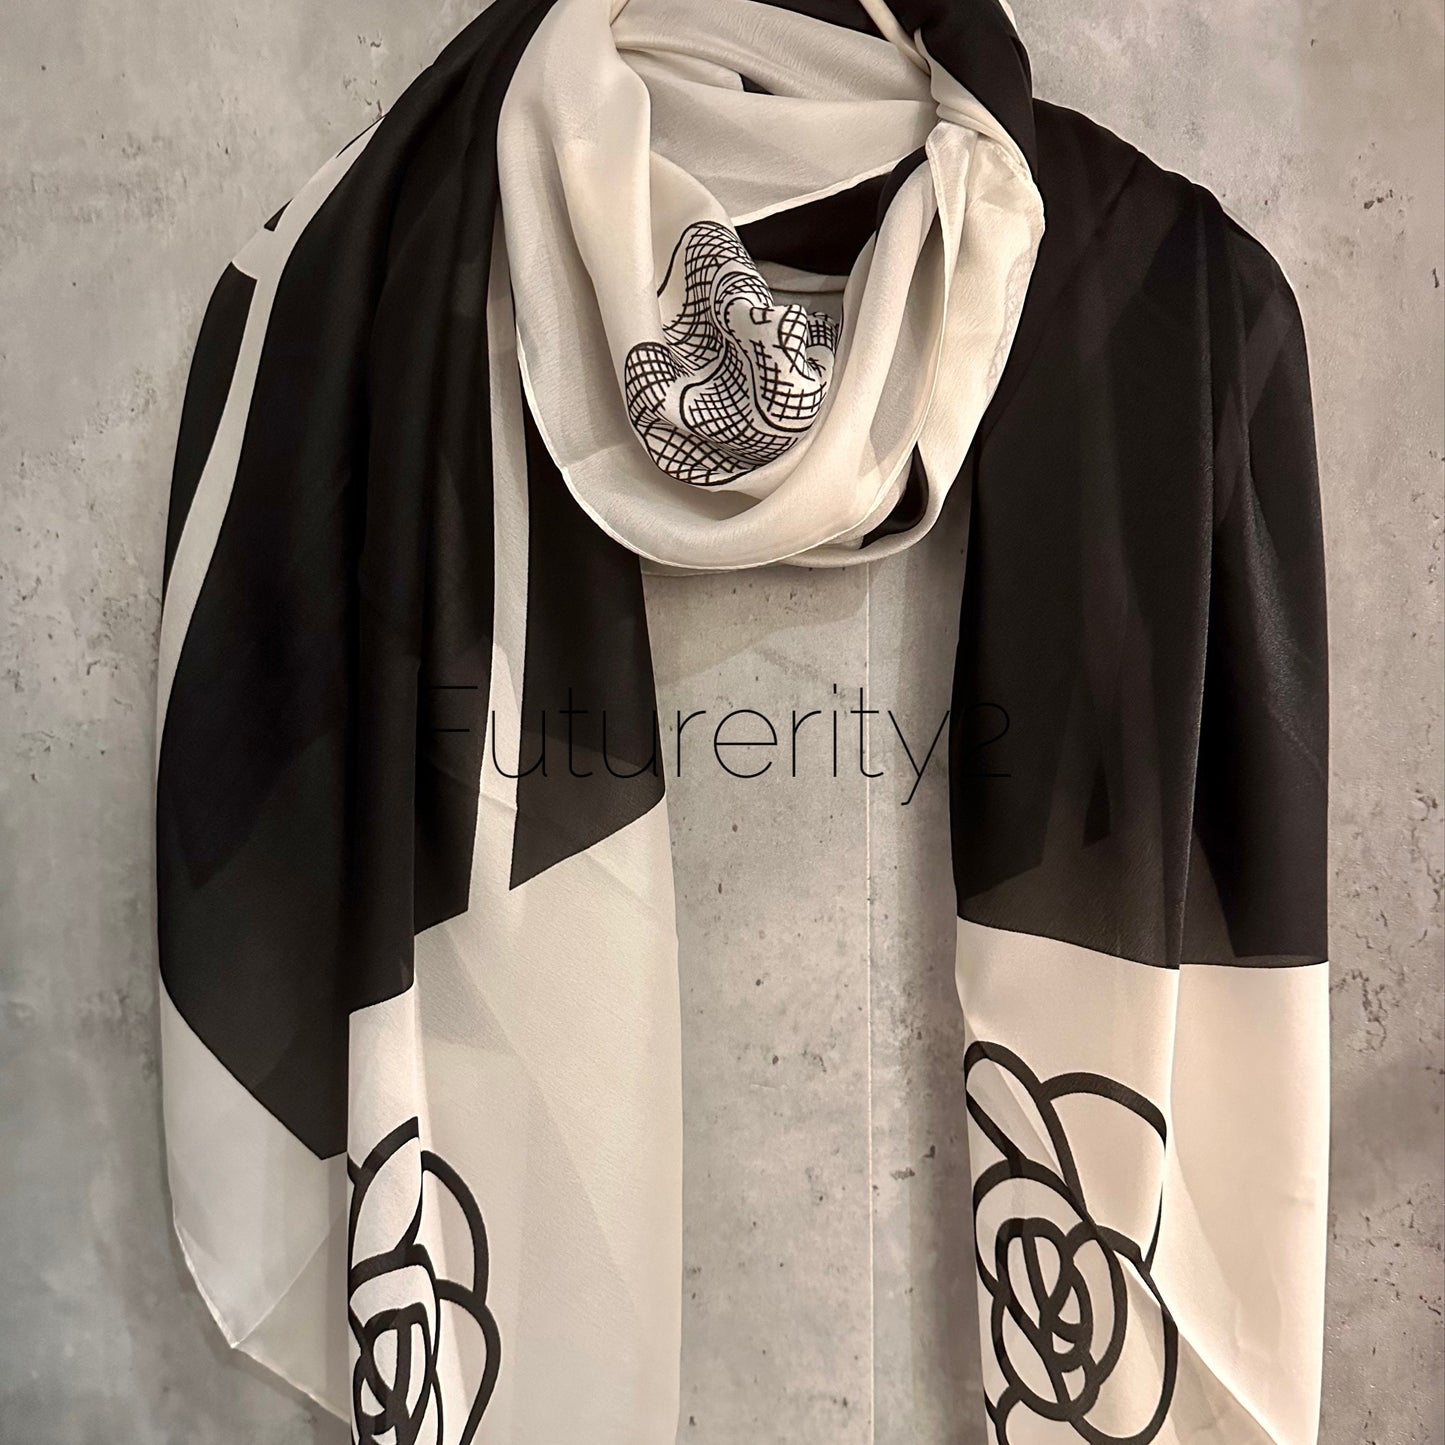 Camellia Flower Black And White Silk Scarf/Spring Summer Autumn Scarf/Scarf Women/Gifts For Mother/Gifts For Birthday Christmas/UK Seller